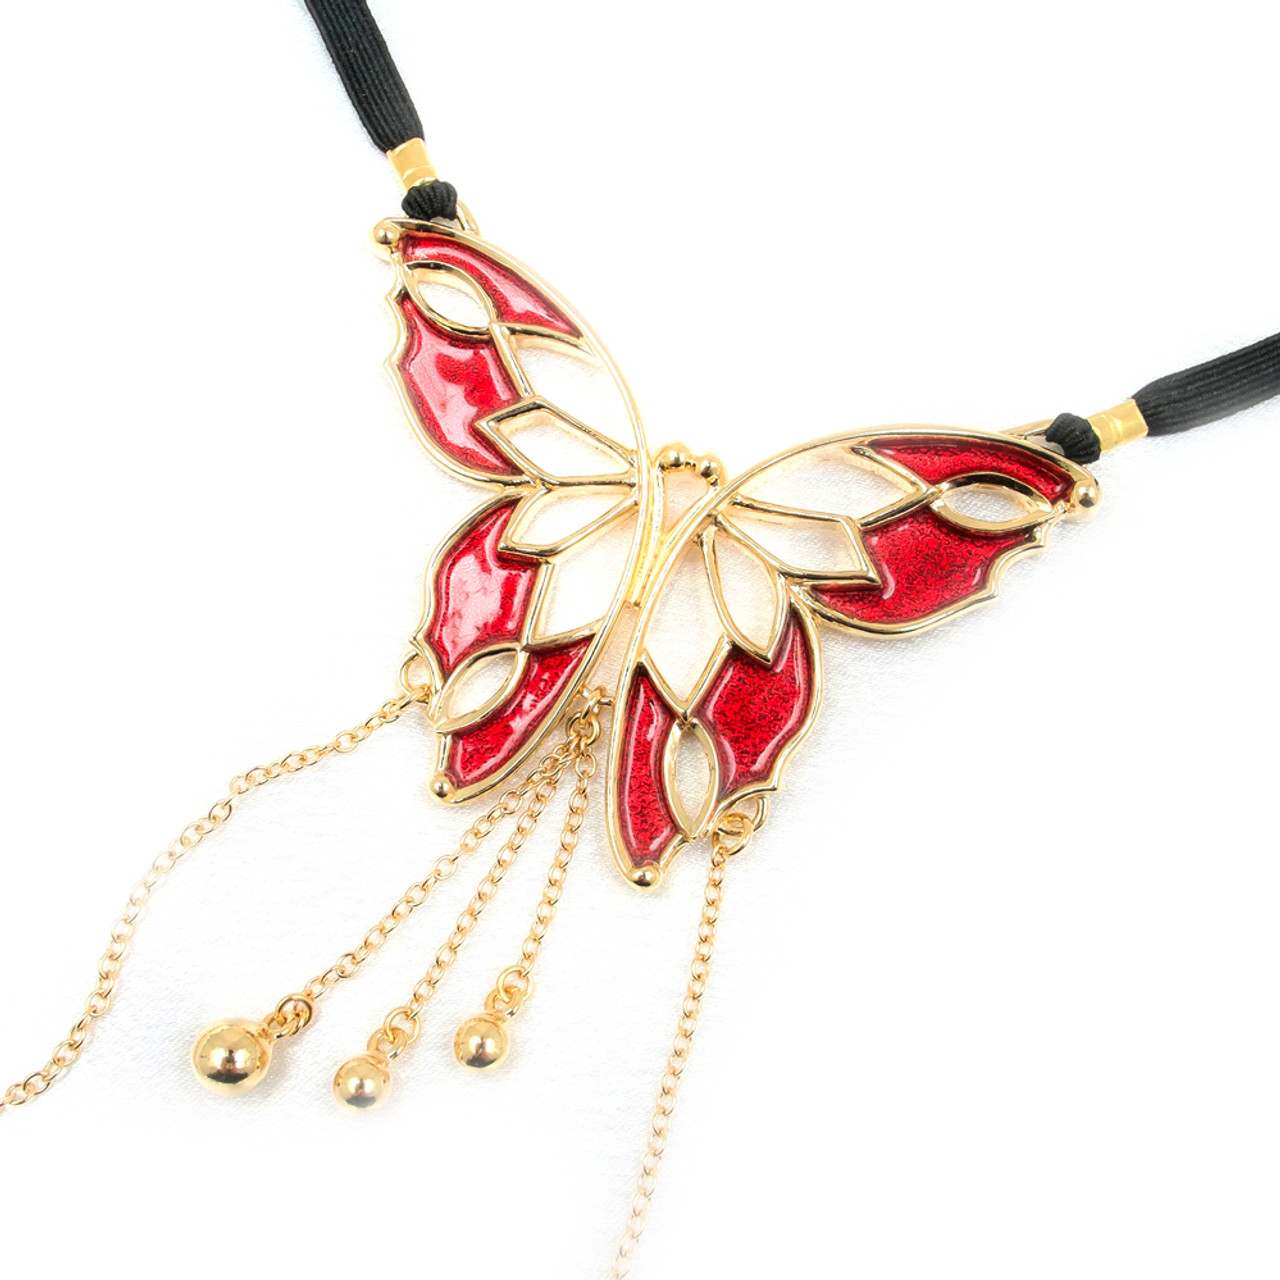 Buy The Vertigo of the Senses Womens Gold and Red Butterfly Figurine with Golden Clitoral Bead pic